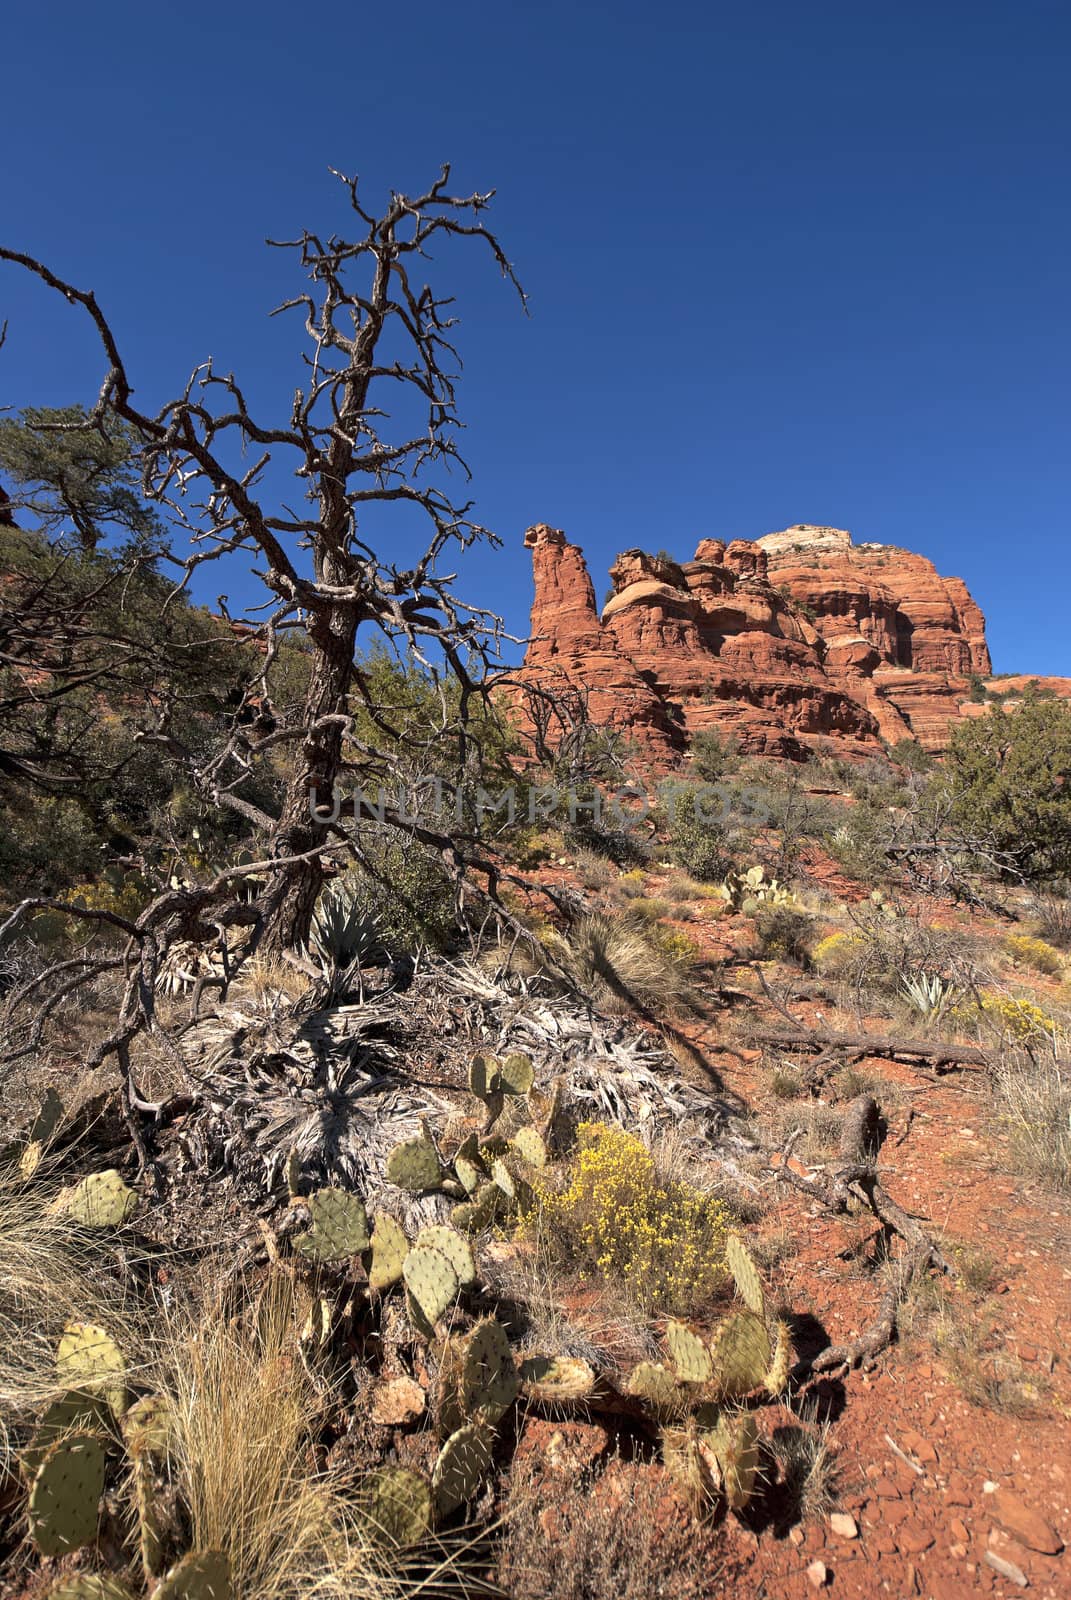 Dead tree, cactus, scrub and red rocks against blue skies.